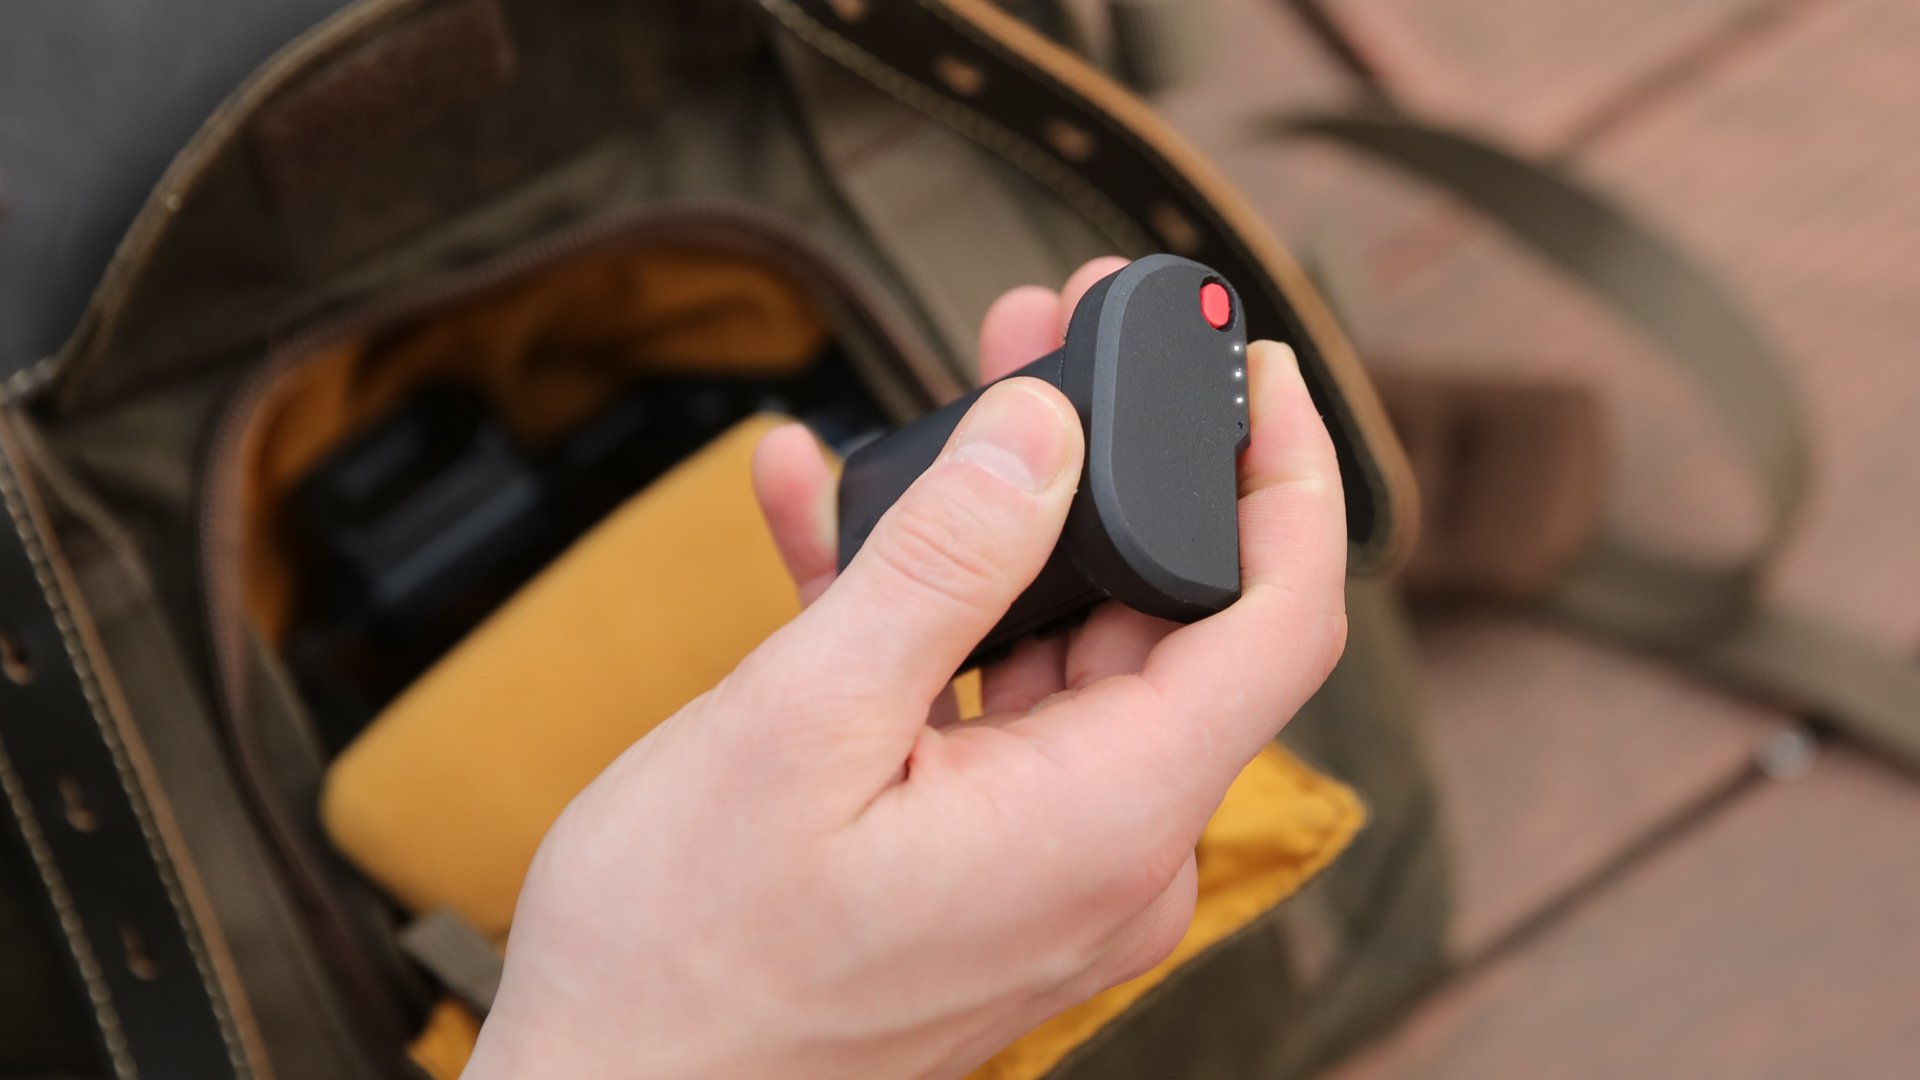 unnamed file 2 - Kickstarter: This Revolutionary Camera Battery will Lighten Your Bag and Change the Way You Shoot